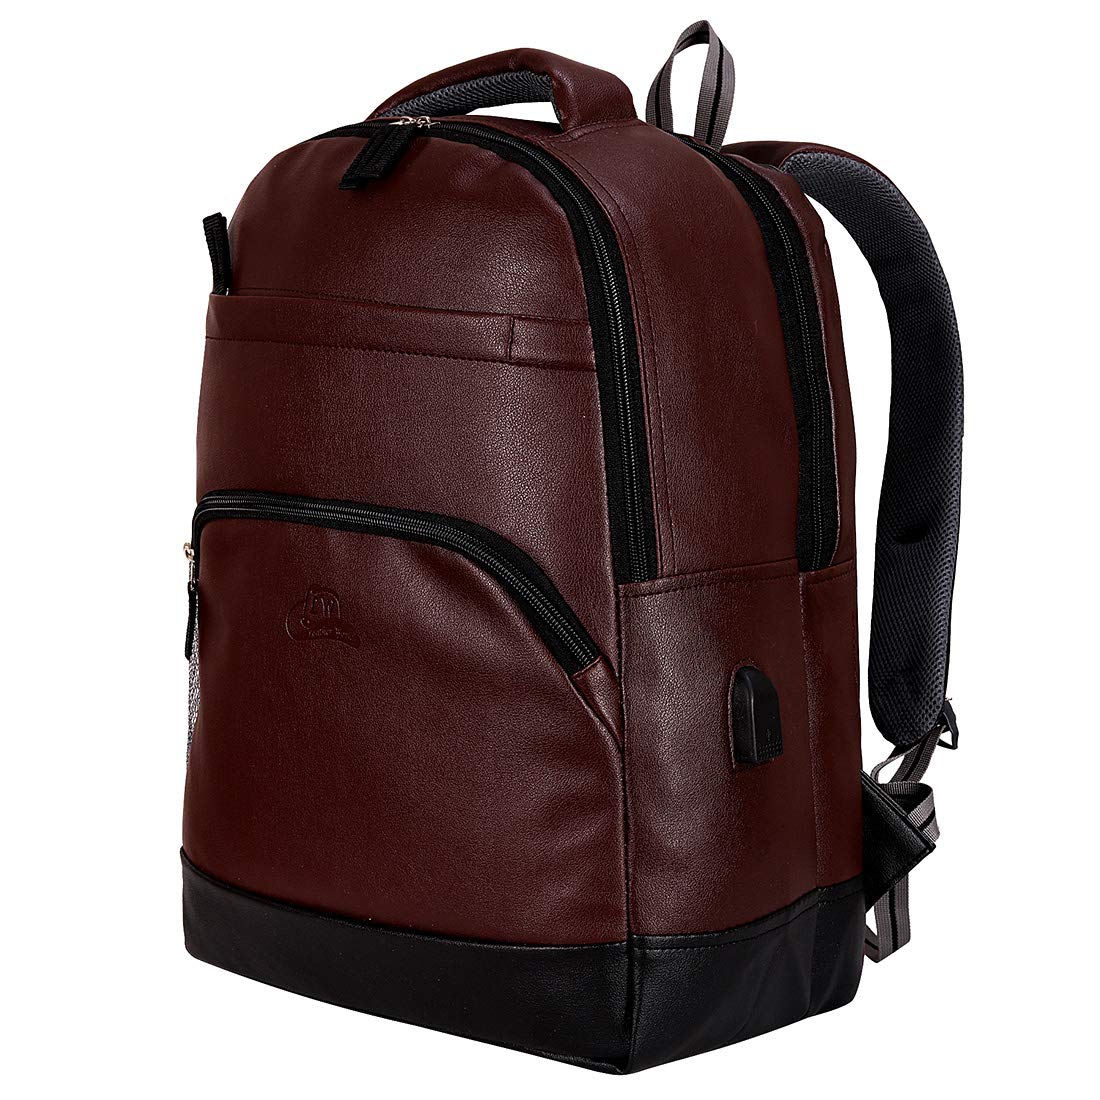 Leather World PU Leather College Office Laptop Backpack with USB